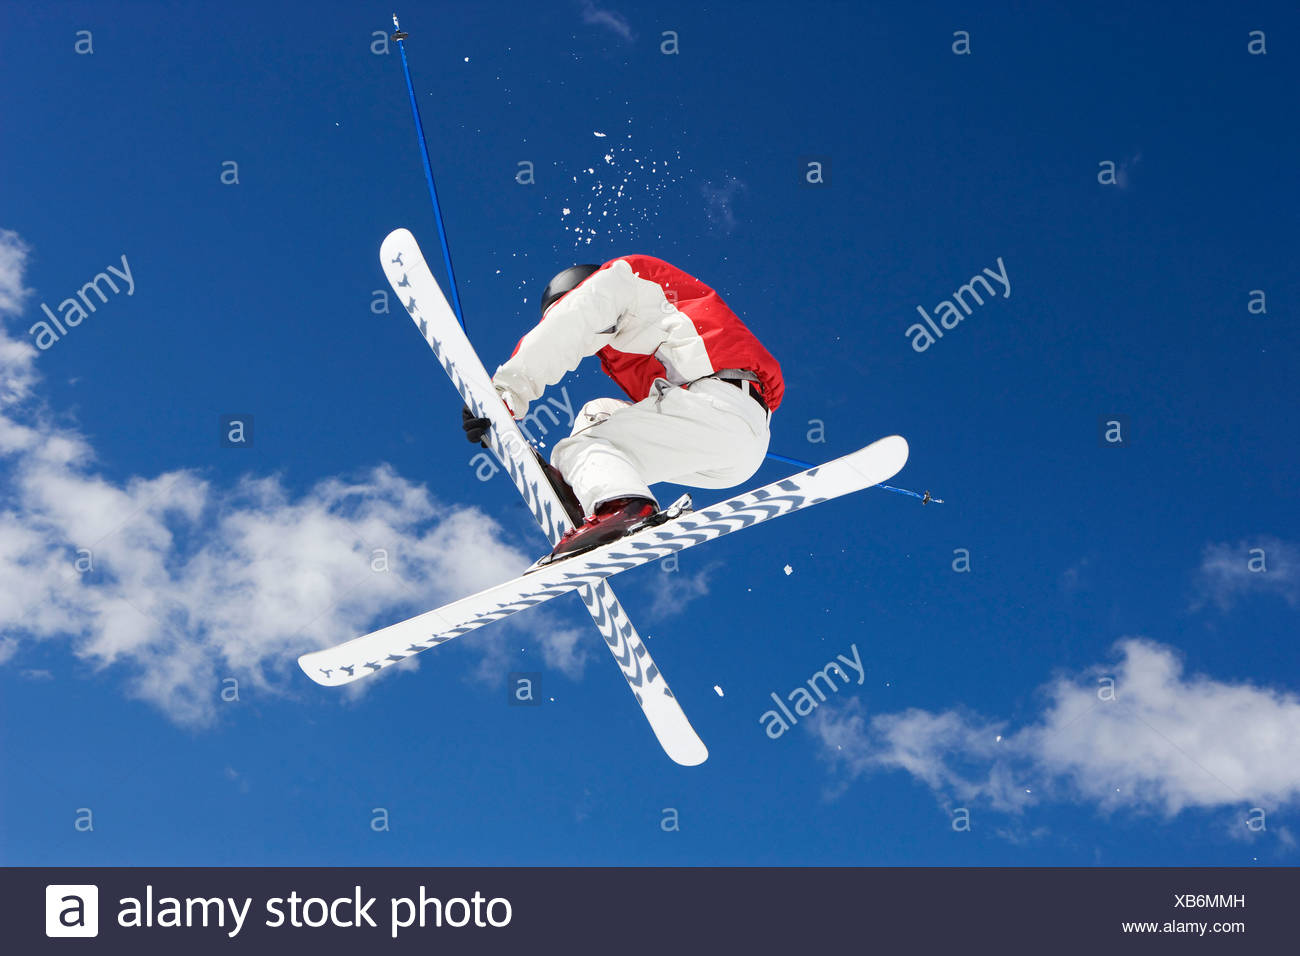 Trick Ski High Resolution Stock Photography and Images - Alamy